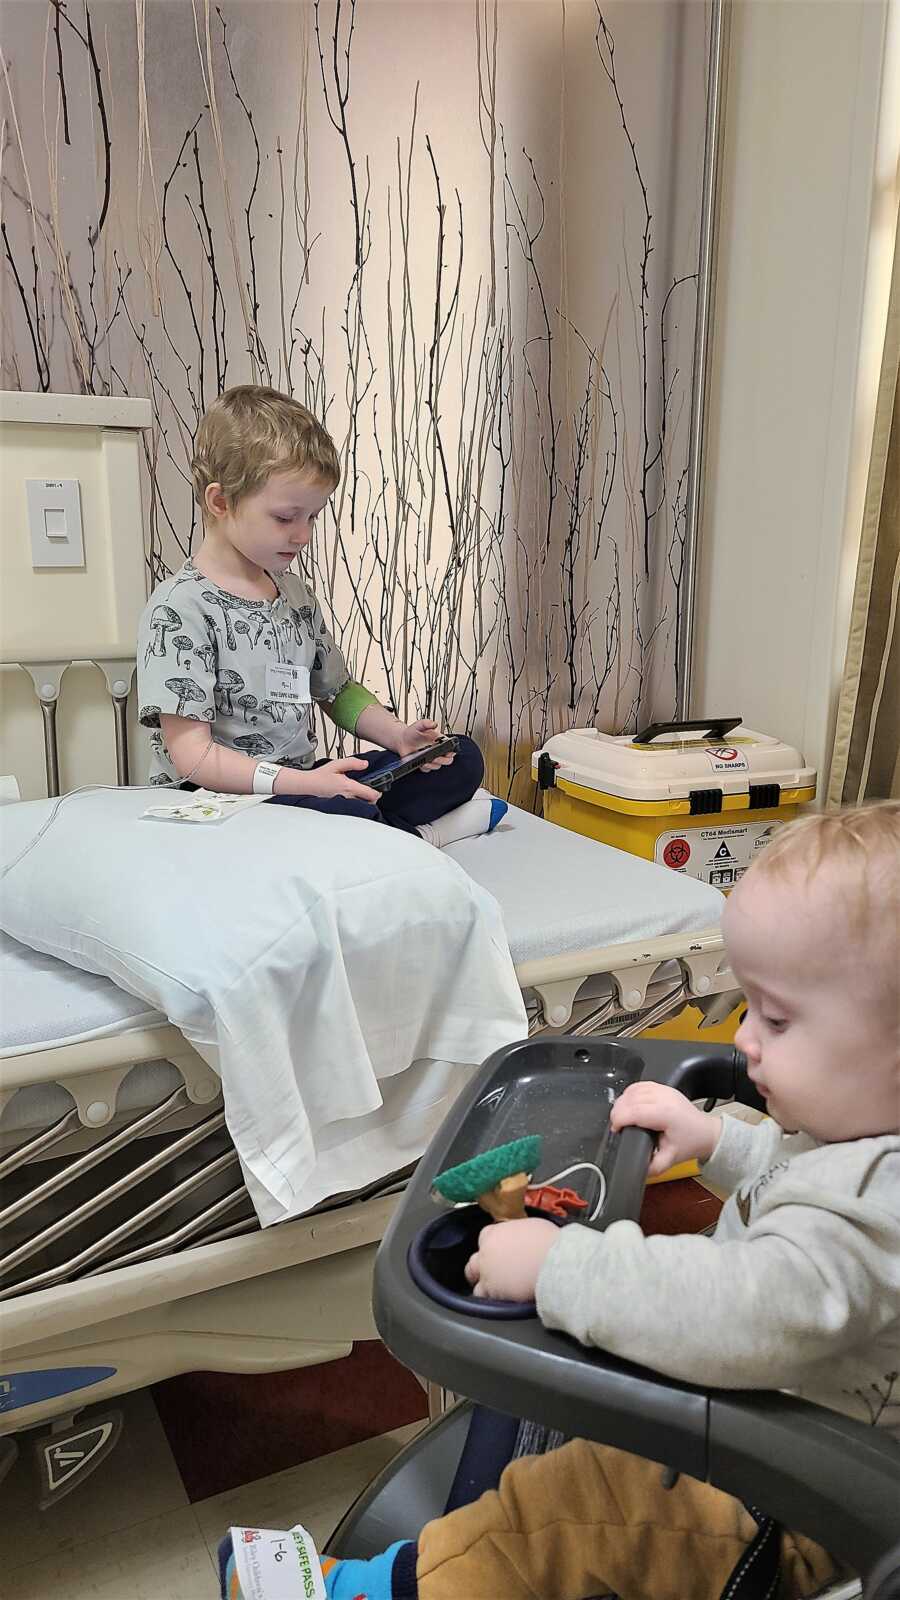 5-year-old kid diagnosed with Wilms Tumor receiving treatment, sitting in a hospital bed while watching videos on a phone next to his little brother 